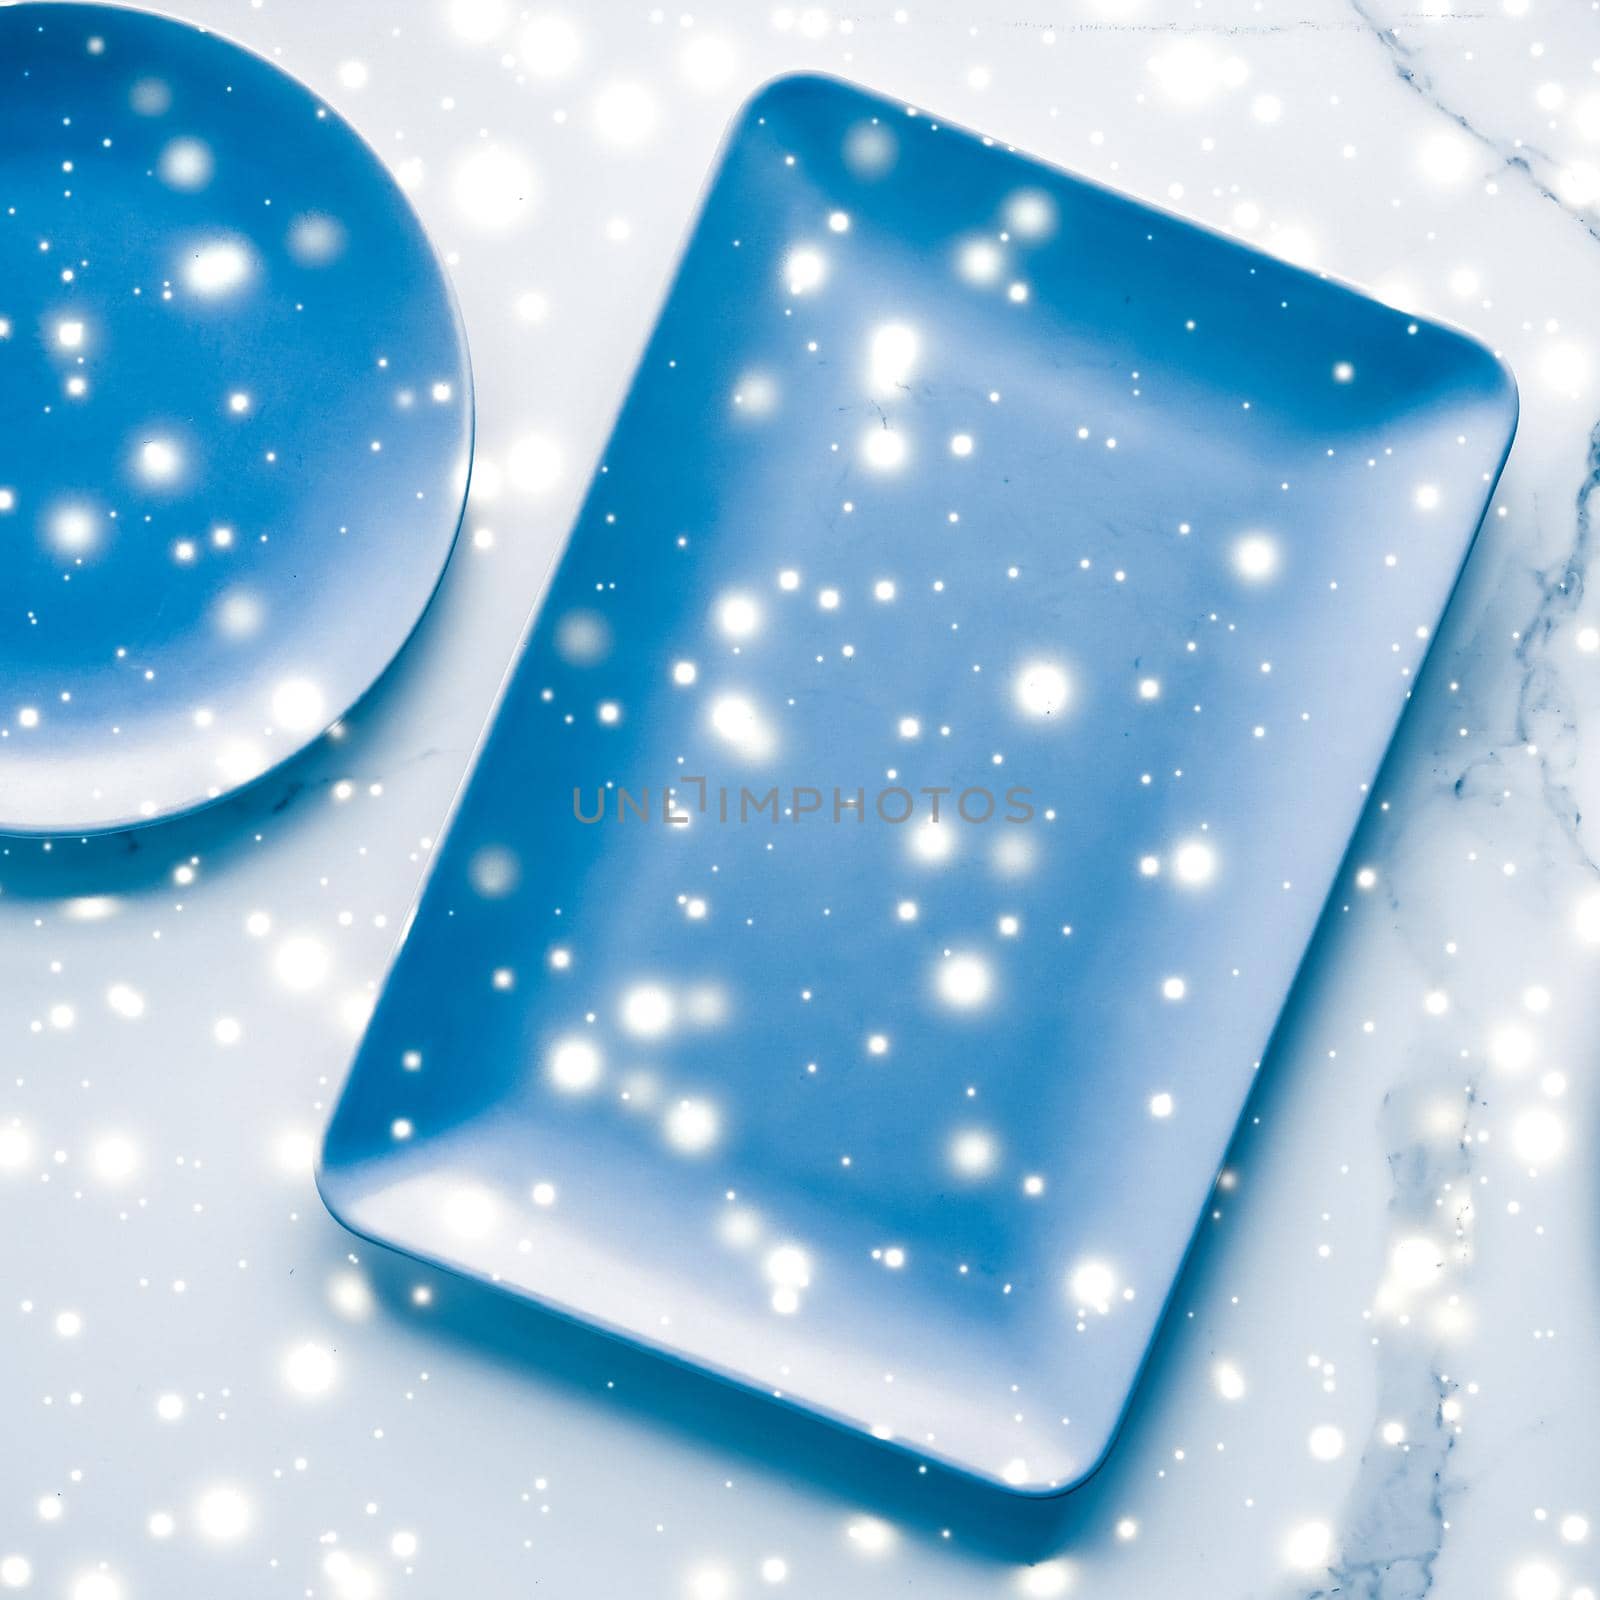 Recipe design, restaurant menu and festive decor concept - Blue empty plate on marble table flatlay background, tableware decoration for holiday dinner in Christmas time